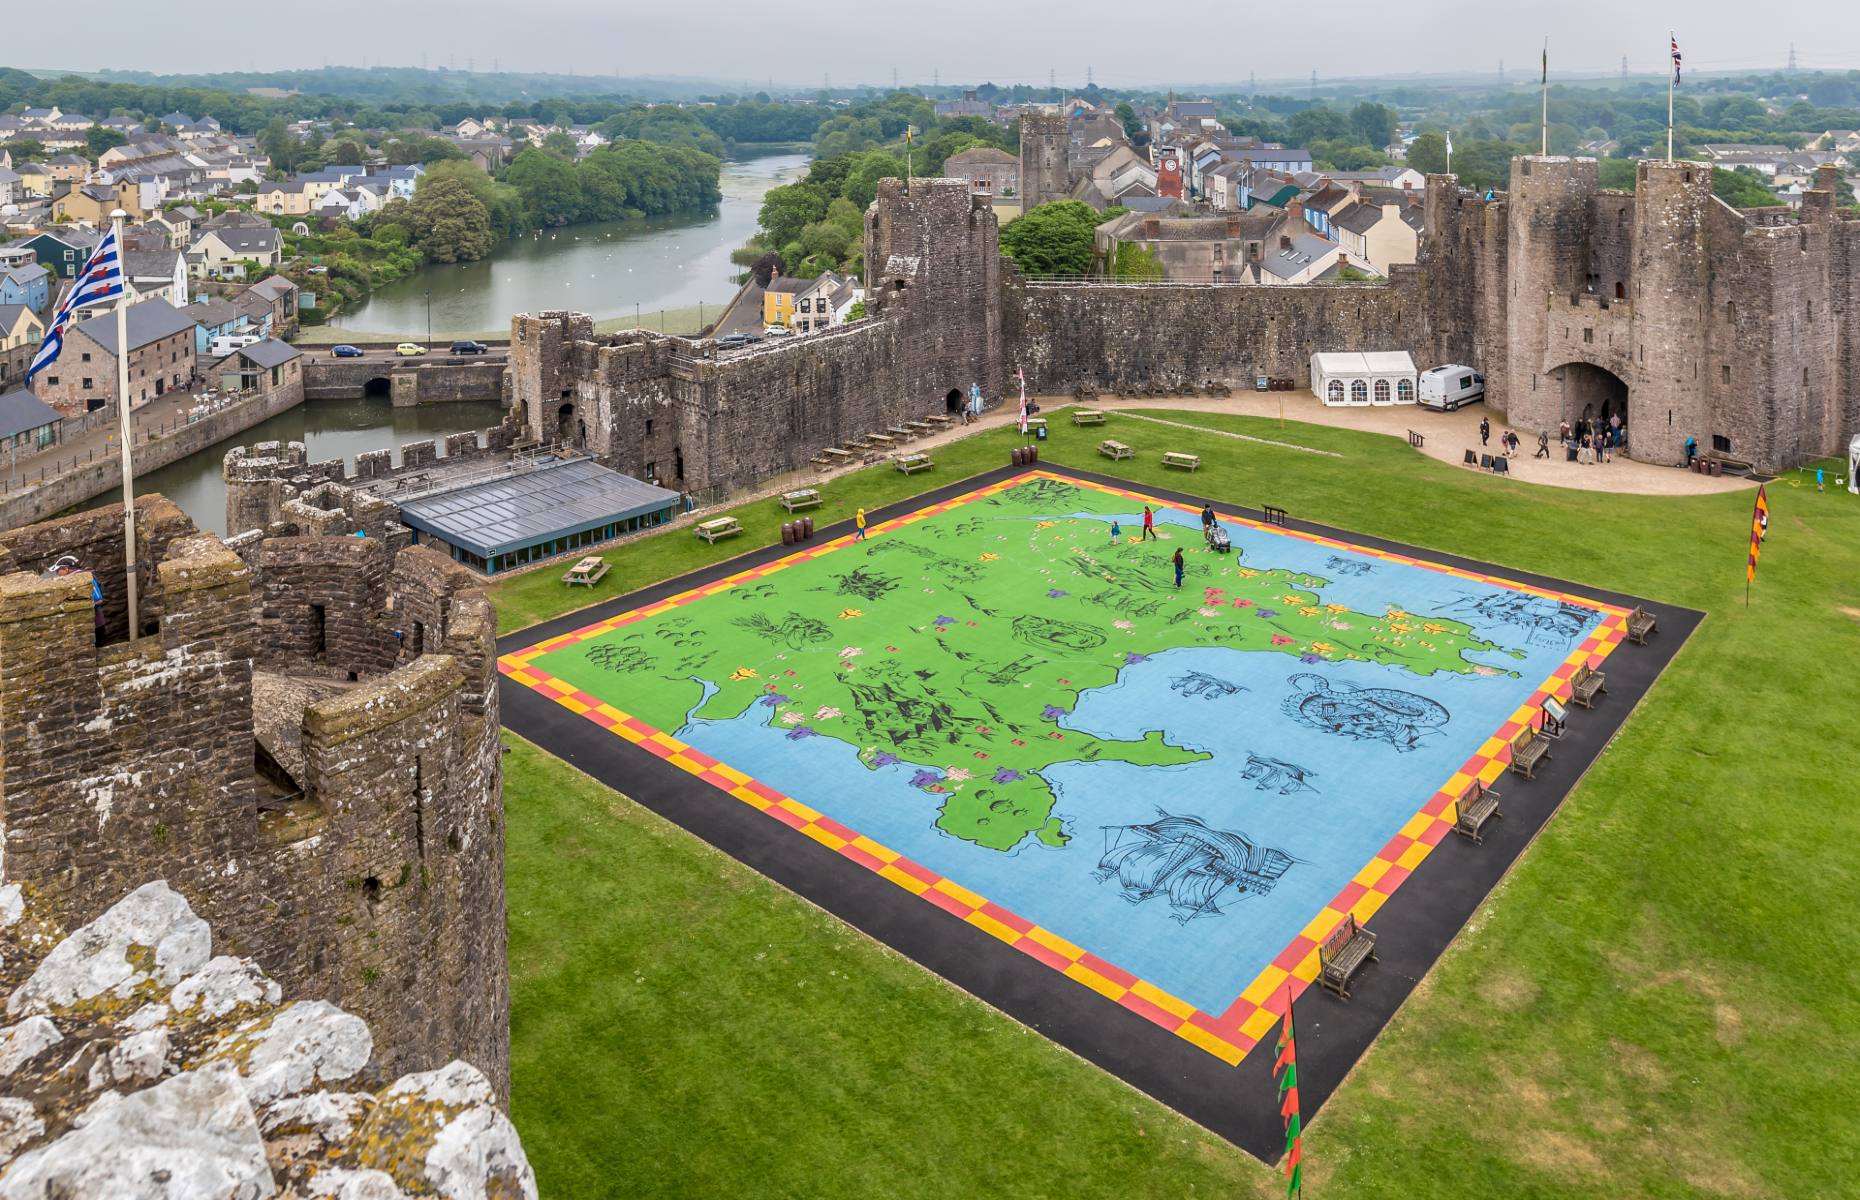 The interactive map on Pembroke Castle's grounds (Image: Alexey Fedorenko/Shutterstock)